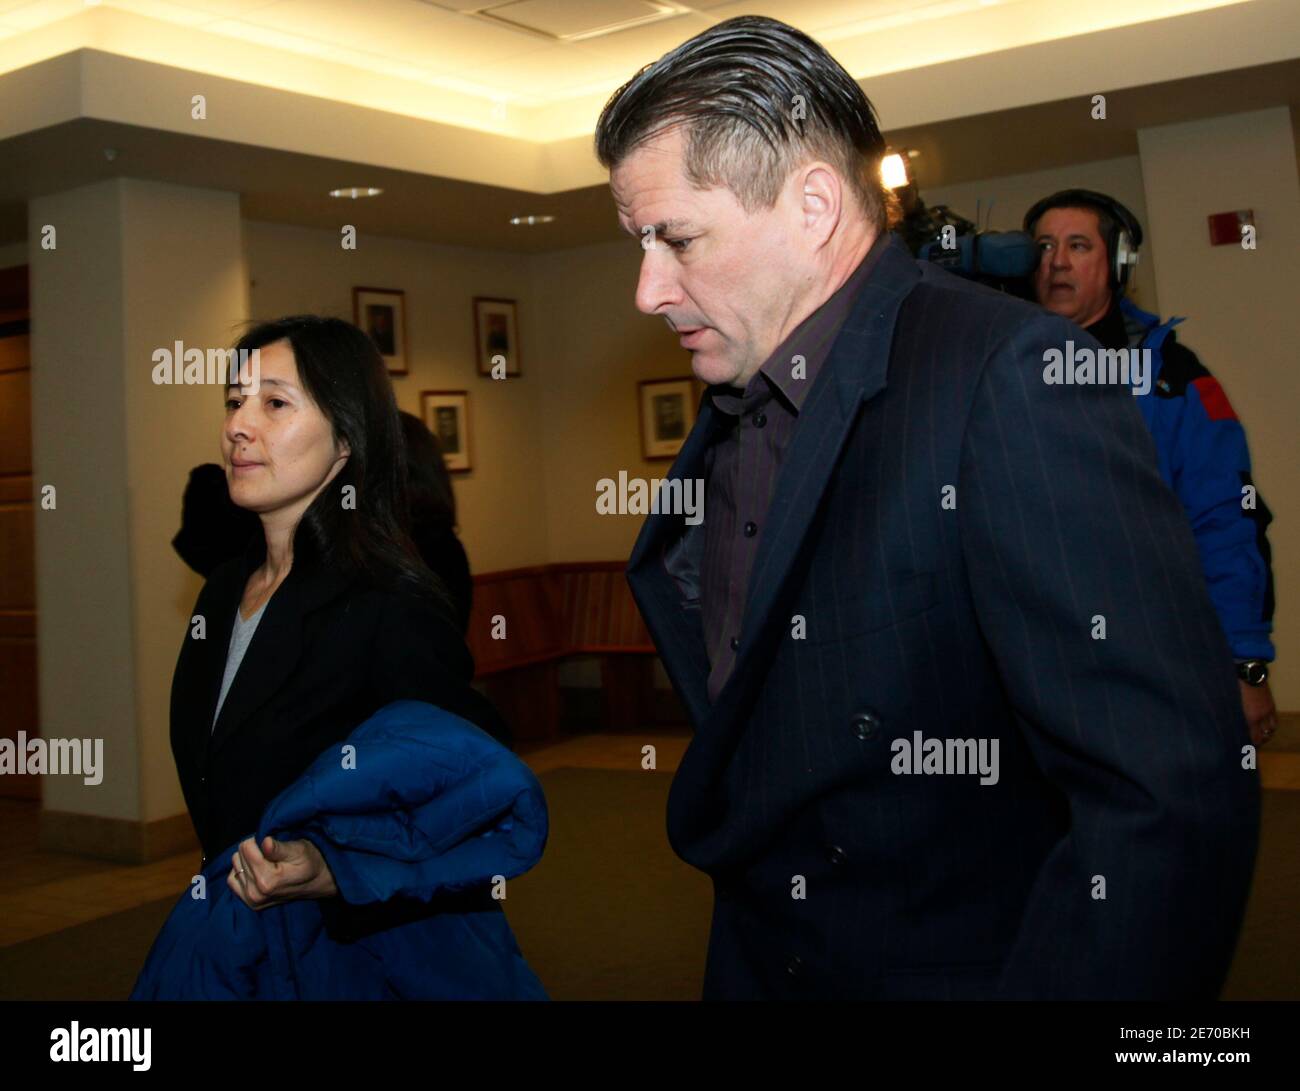 Richard (R) and Mayumi Heene arrive at  Larimer County district court for their sentencing hearing in Fort Collins, Colorado December 23, 2009. The parents of a Colorado boy thought to have floated away in a homemade helium balloon are being sentenced on criminal charges of staging the incident in a publicity-seeking hoax. REUTERS/Rick Wilking (UNITED STATES - Tags: SOCIETY) Stock Photo